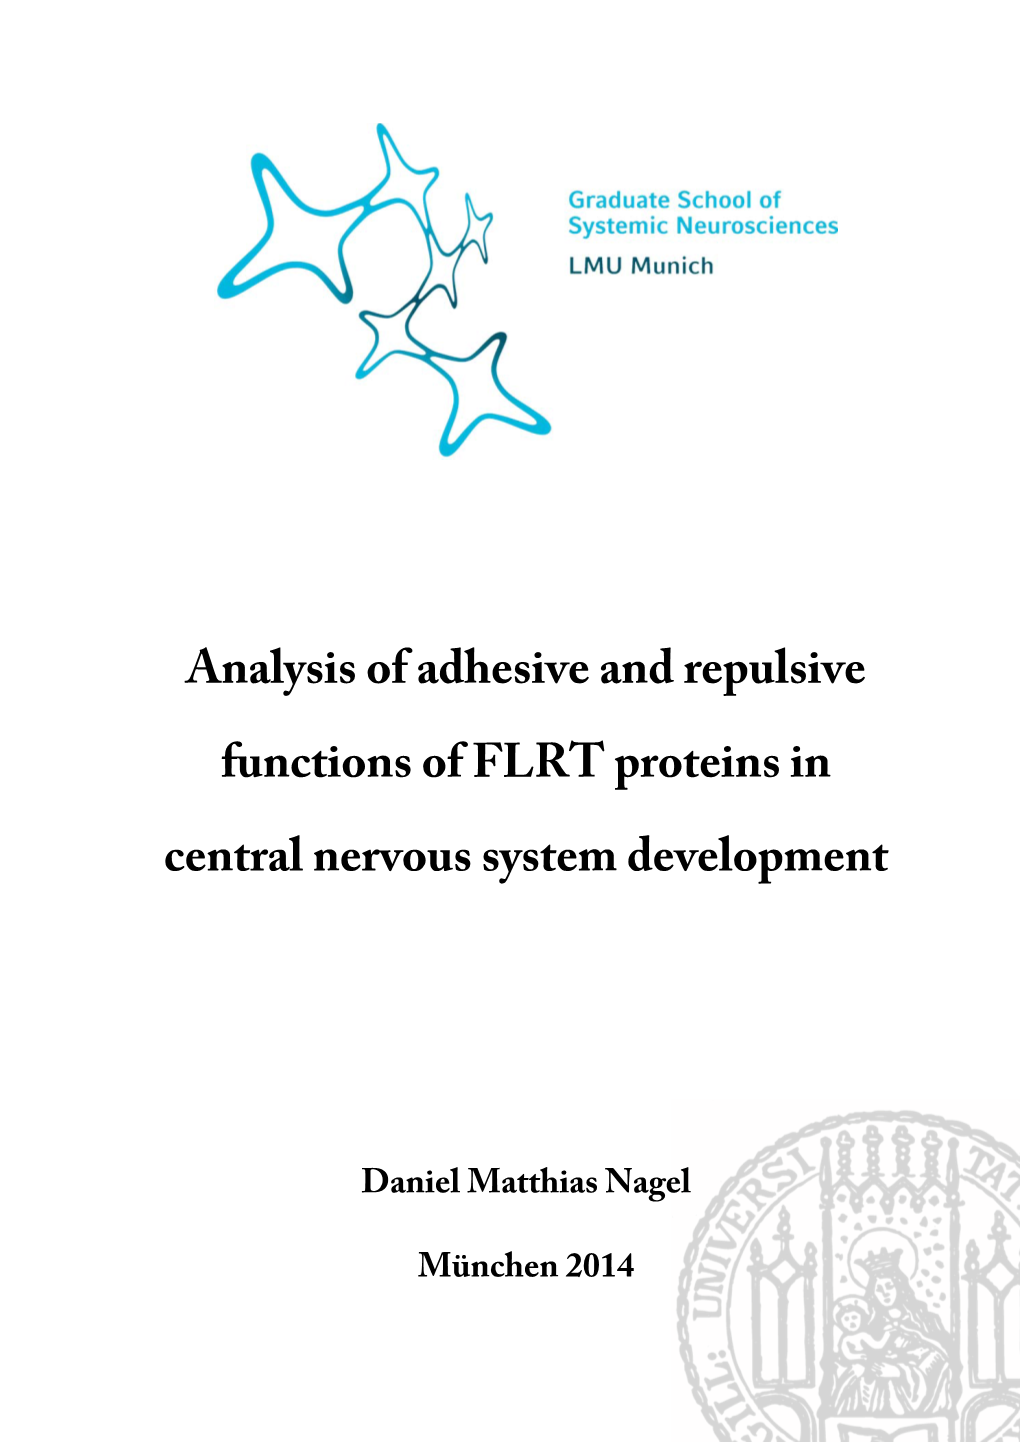 Analysis of Adhesive and Repulsive Functions of FLRT Proteins in Central Nervous System Development